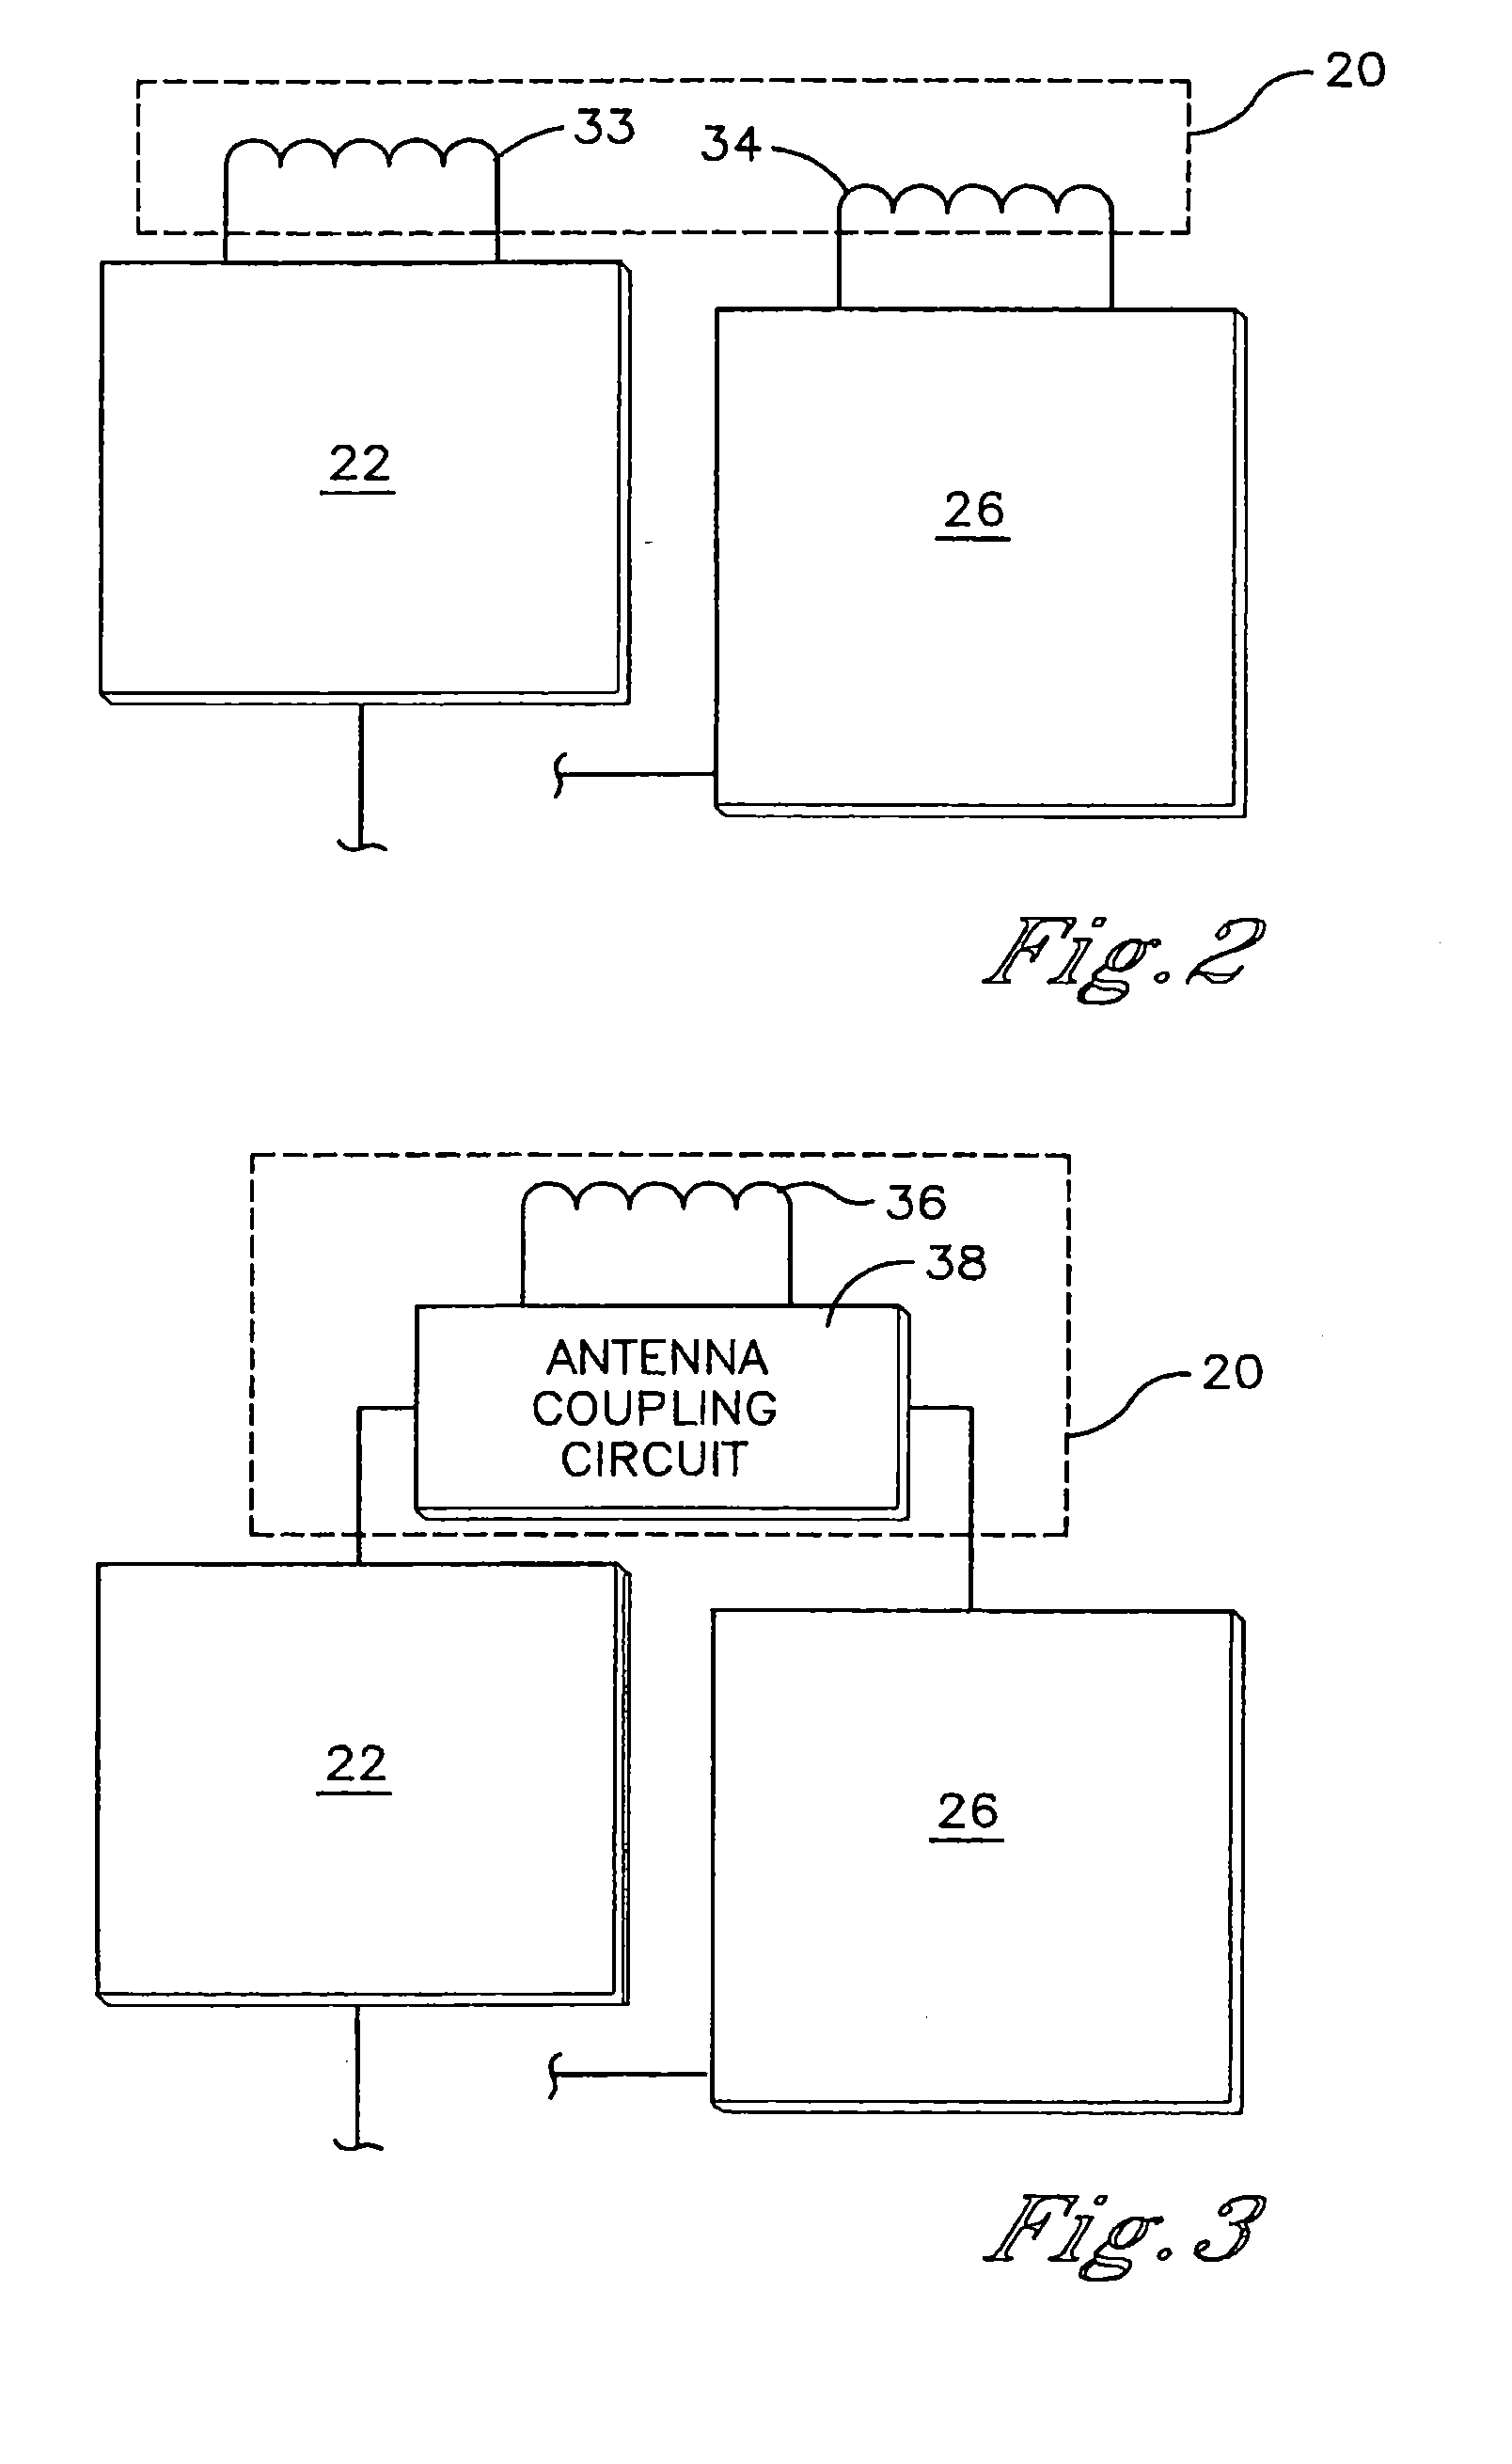 Switched capacitance method for the detection of, and subsequent communication with a wireless transponder device using a single antenna